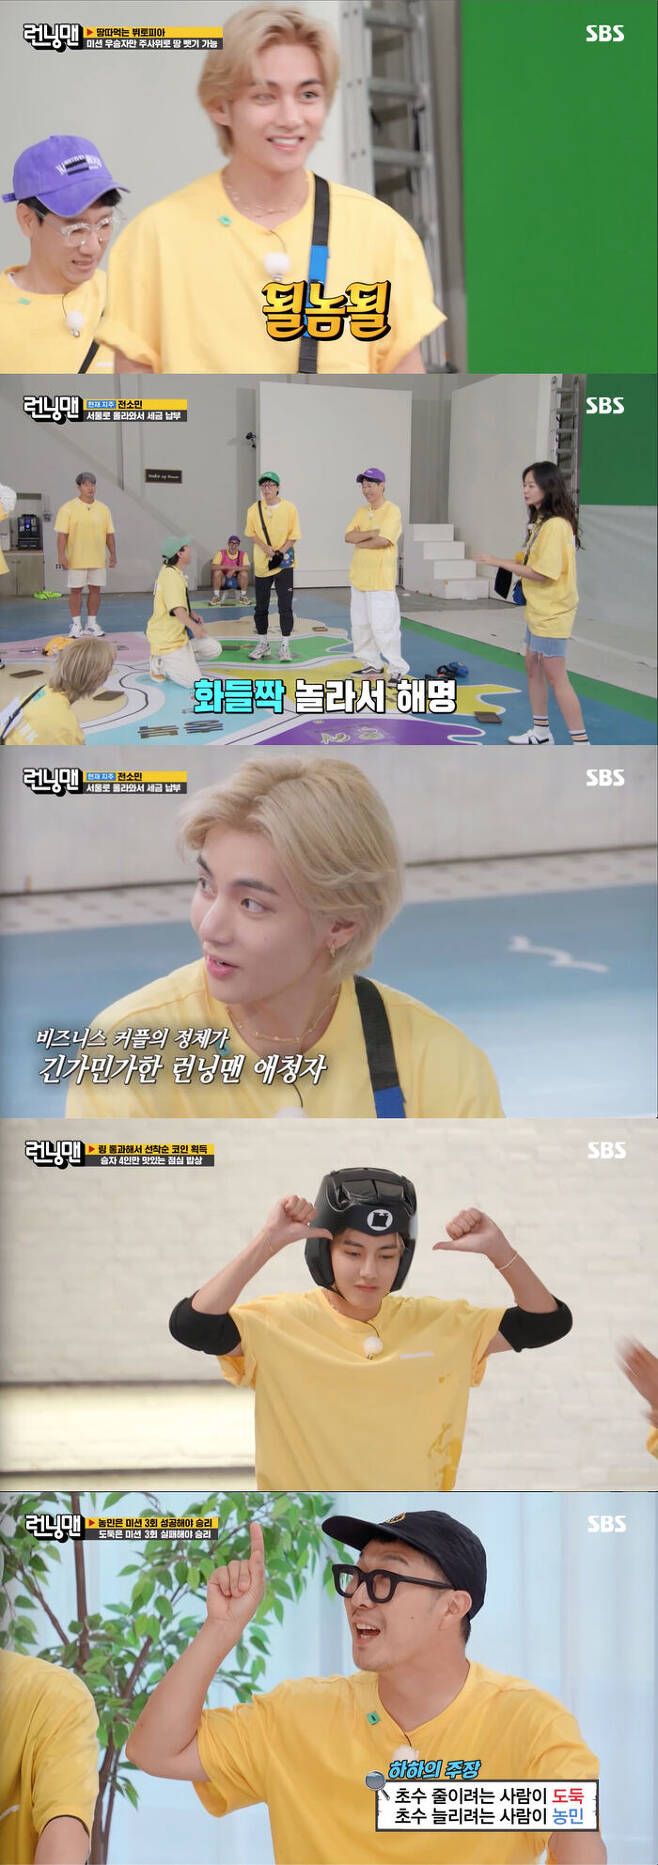 V was the best player of all time.On SBS Running Man broadcasted on the 10th, Land-eating Butopia Race was held.On this day, BTS V appeared as a guest and surprised everyone. Running Man usually said that he wanted to appear as a friend of Jasins rice.During the opening ceremony, V secretly called Ji Suk-jin, and Ji Suk-jin, who was excited about it, was glad to see what was going on.Then, Vu said, You came out with a nose hair.Also on this day, V appeared as a Landlord who managed the tenants and listened to the members, and the members liked him and struggled to get one more COIN.In addition to his work as an entertainer, V also showed his innocence as a Running Man fan. He was surprised to see Jeon So-min and Yang Se-chan, who are called lovers during the game, and asked the production crew if it was real.So, Jeon So-min Yang Se-chan said, No, no, no, no.V also performed best in each mission, and his performance shone in the final vote to capture the last Theft captain.He was selected as a finalist for Captain Theft; however, he was only Theft; the farmers who failed to capture Captain Theft failed to come from behind.Breaking everyones expectations, Captain Theft was Kim Jong-kook, the perfect defeat for Haha, who did not bend Jasins claim throughout the reasoning.On the other hand, Theft was able to win the match well to the end, and there was a V at the center.V said, Actually, we didnt say anything. Ive been feeling it since I knitted it from the bottom, my brother. When I saw Kim Jong-kook weaving a blanket roughly, I found out that he was the captain and acted, drawing admiration.Thanks to these performances, V won the final victory of the day, and he won the overwhelming first place with overwhelming play.The members then praised Vu and encouraged him to come out again.Vu said, I feel so good that I can come to the scene and shoot together, and I think I have actually achieved Rob Reiner.In fact, Ive watched too much TV, so everyone is an entertainer, he said. I really enjoyed it and I want to come out again next time.